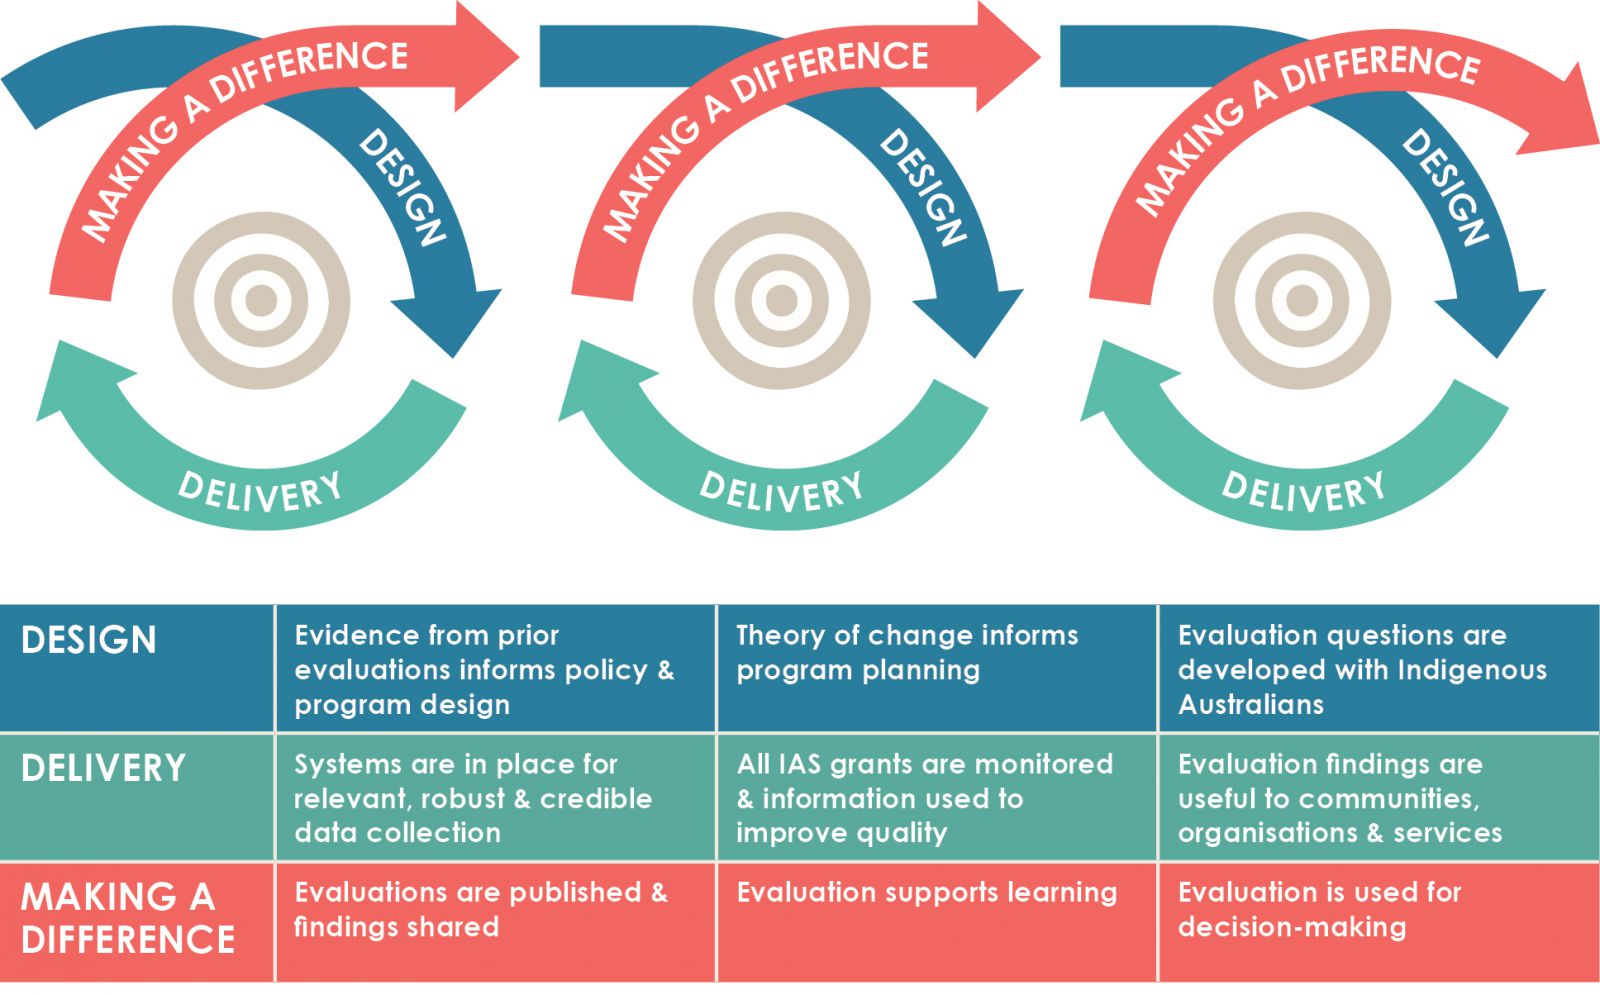 Figure 3 shows iterative cycles of design, delivery and making a difference. Design includes: evidence from prior evaluations informs policy and program design; program logic informs program planning; and evaluation questions are developed with Indigenous Australians. Delivery includes: systems are in place for relevant, robust and credible data collection; all Indigenous Advancement Strategy grants are monitored and information used to improve quality; and evaluation findings are useful to communities, organisations and services. Making a difference includes: evaluations are published and findings shared; evaluation supports learning; and evaluation is used for decision-making.